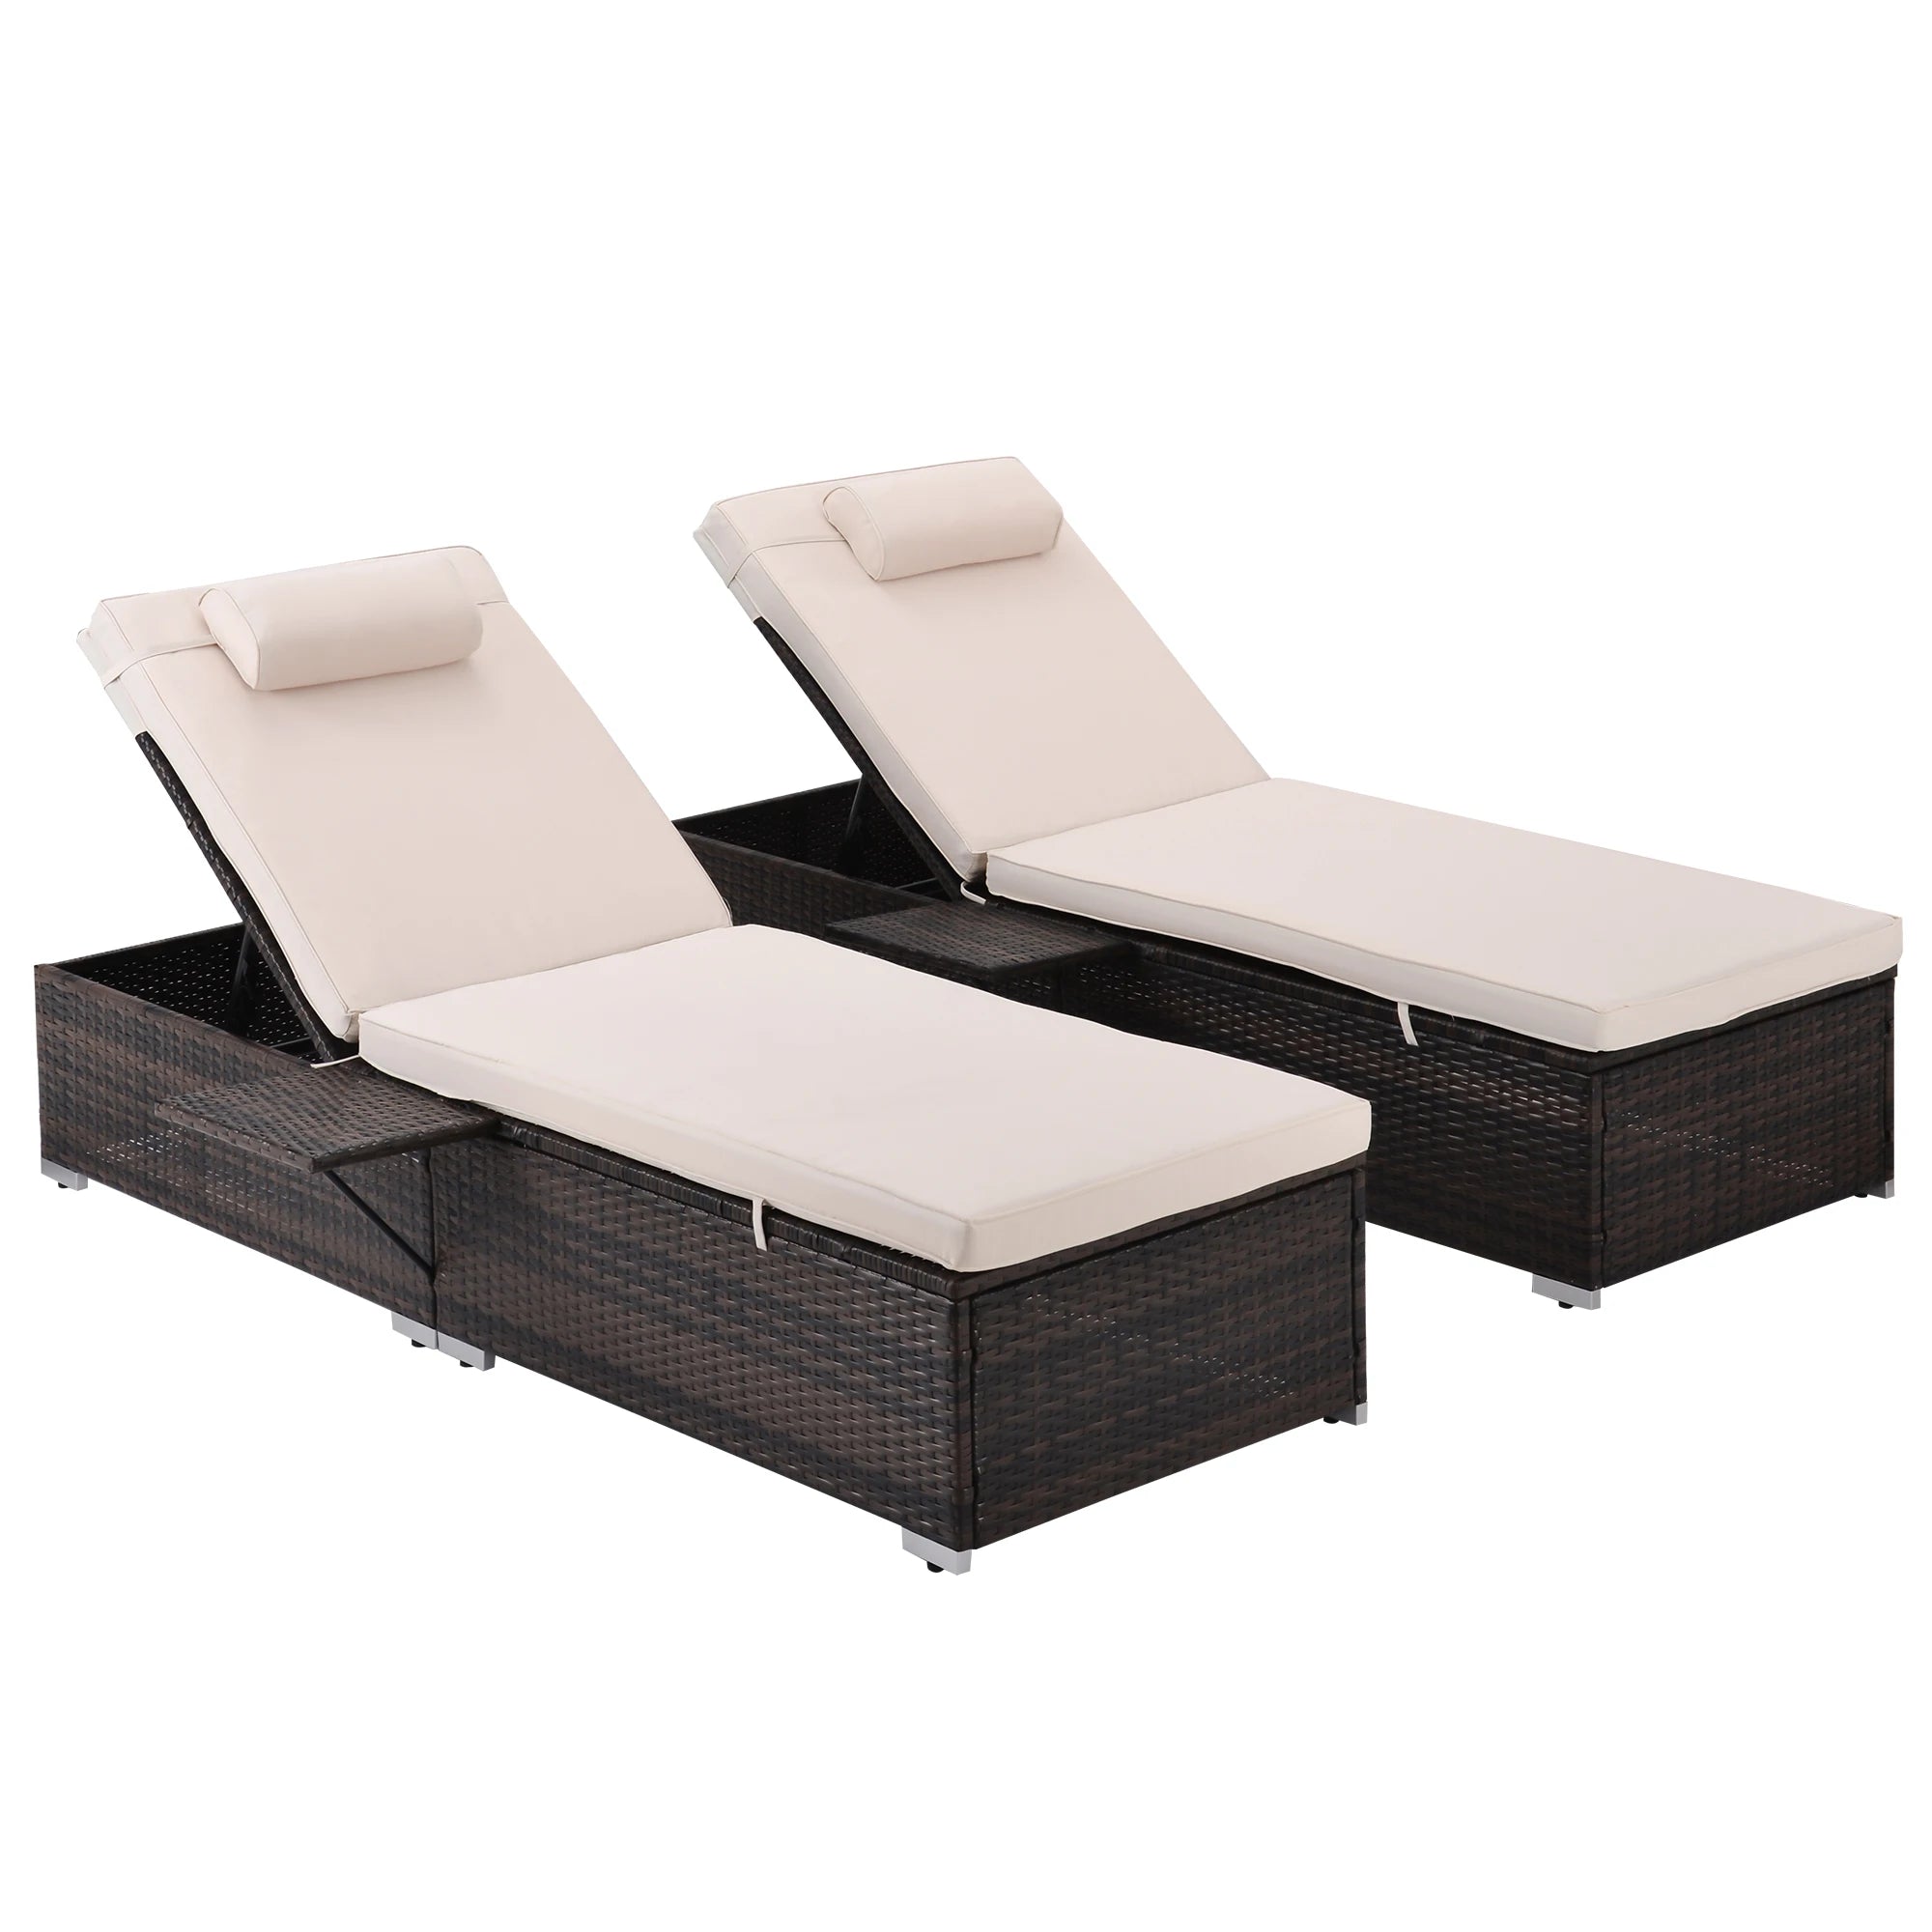 2 Piece Outdoor PE Wicker Chaise Lounge Furniture Set - Beach Pool Adjustable Backrest Recliners Brown Rattan Reclining Chair